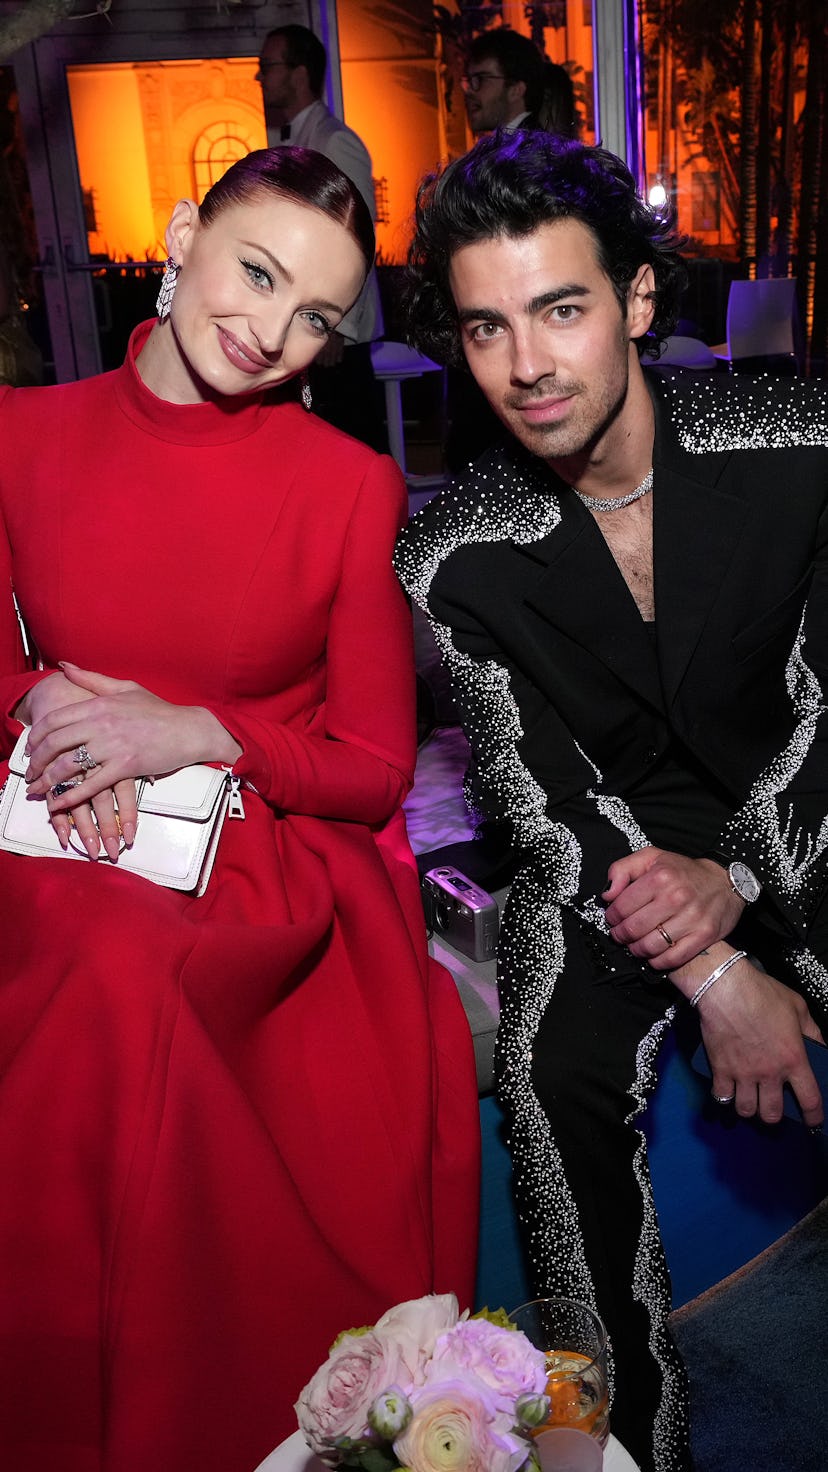 7 Celebrity Couples Who Got Vegas Married In The Past 25 Years Like Joe Jonas and Sophie Turner as w...